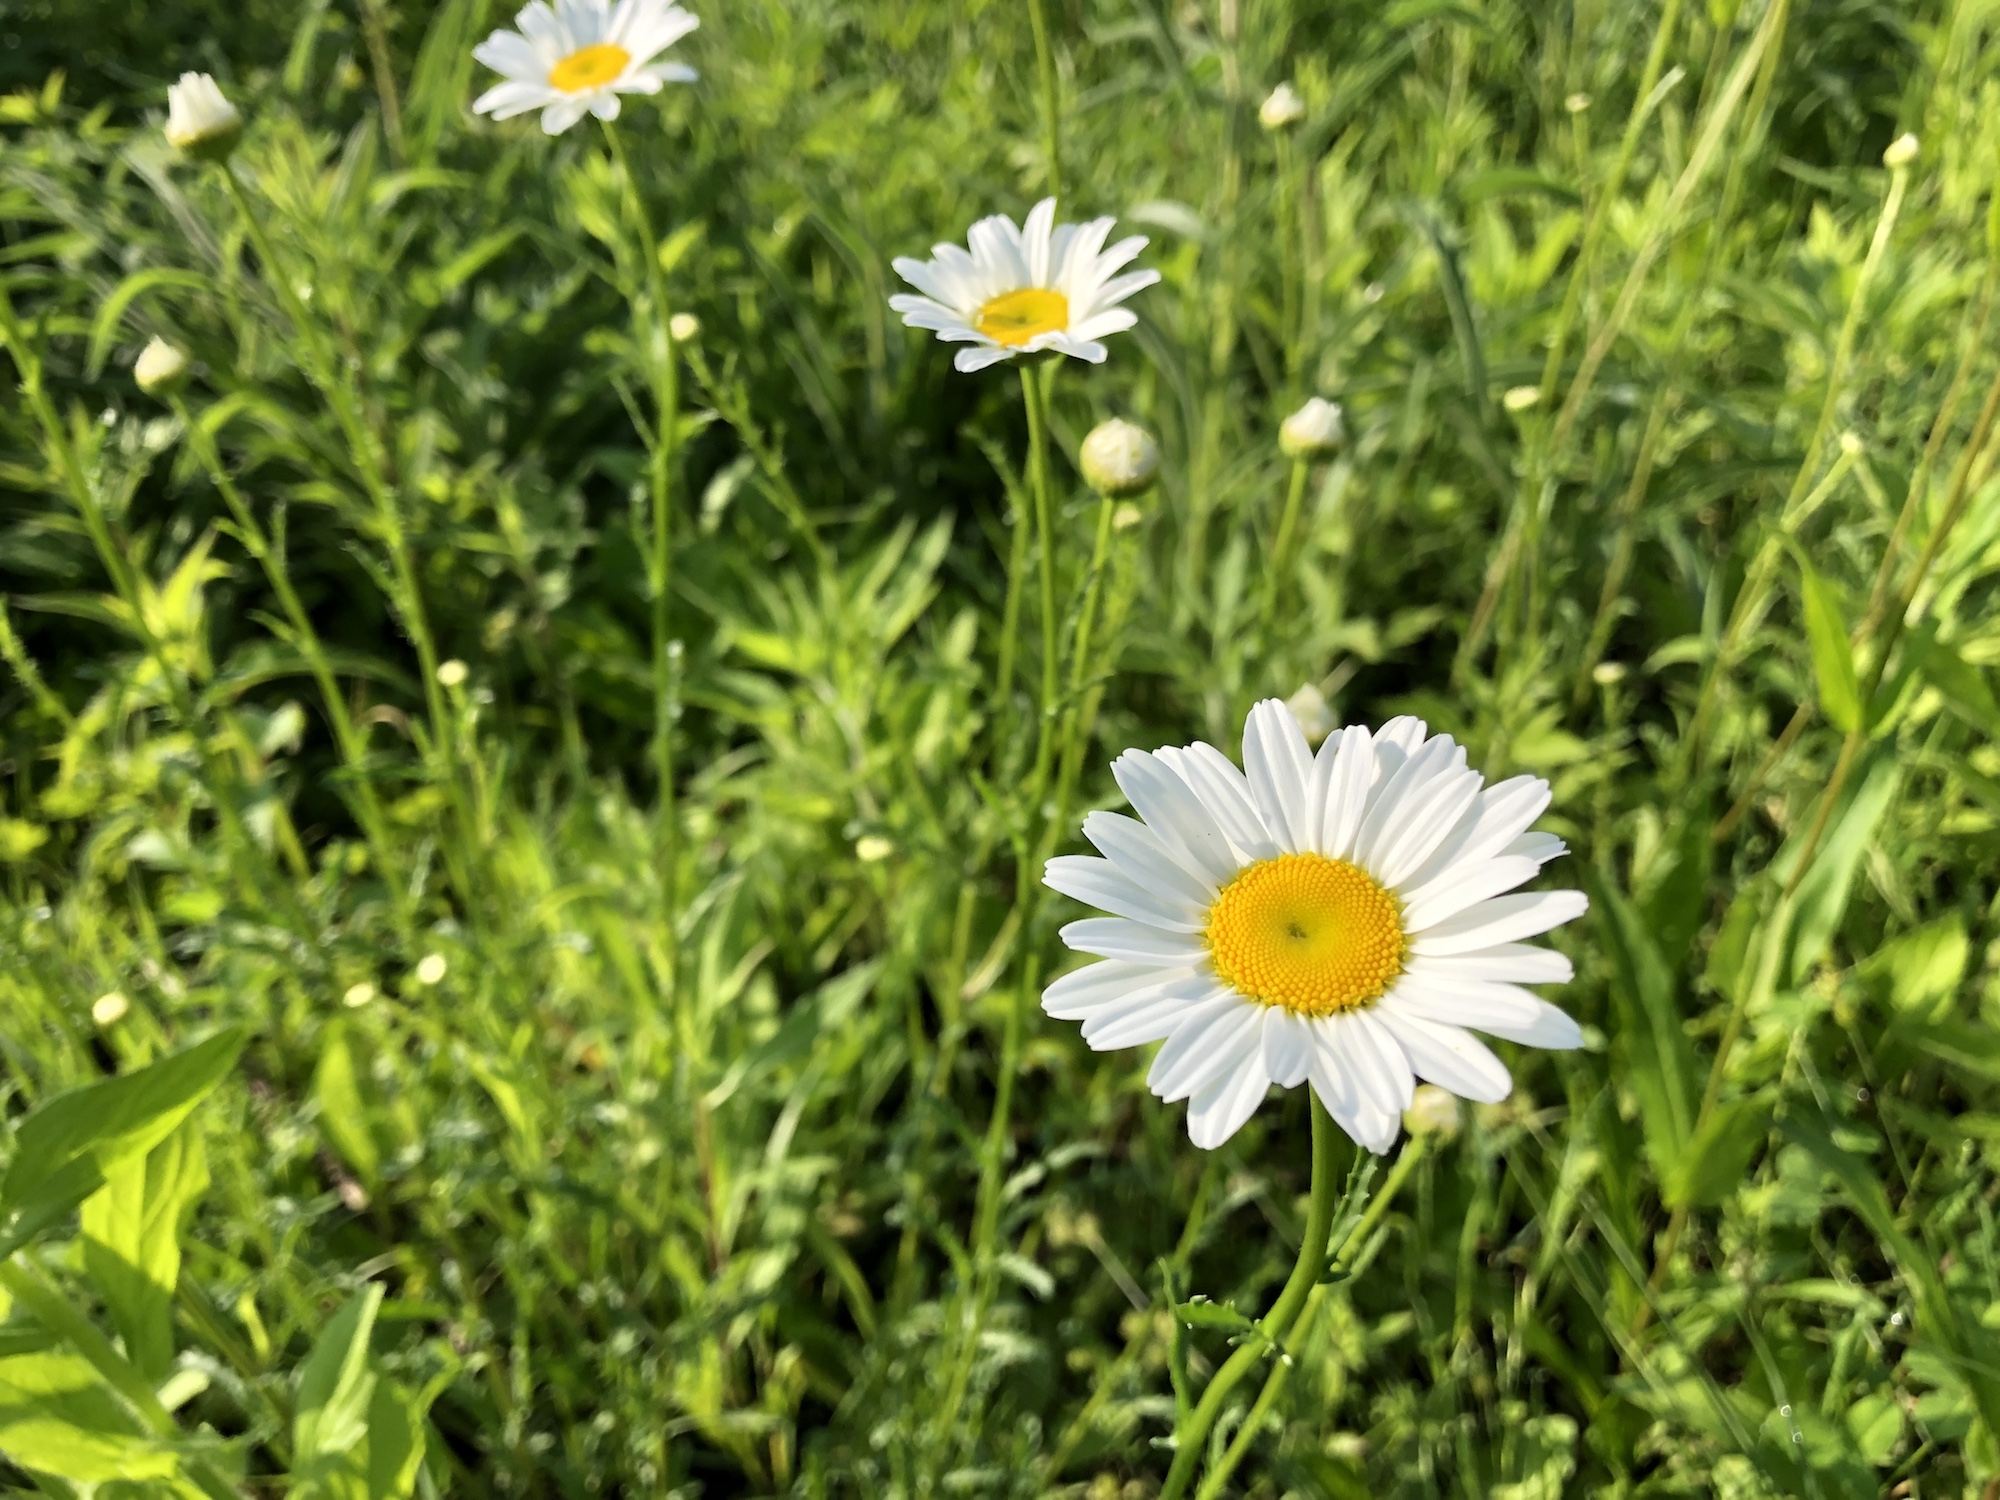 Daisy on bank of retaining pond at the corner of Manitou Way and Nakoma Road in Madison, Wisconsin on June 6, 2019.